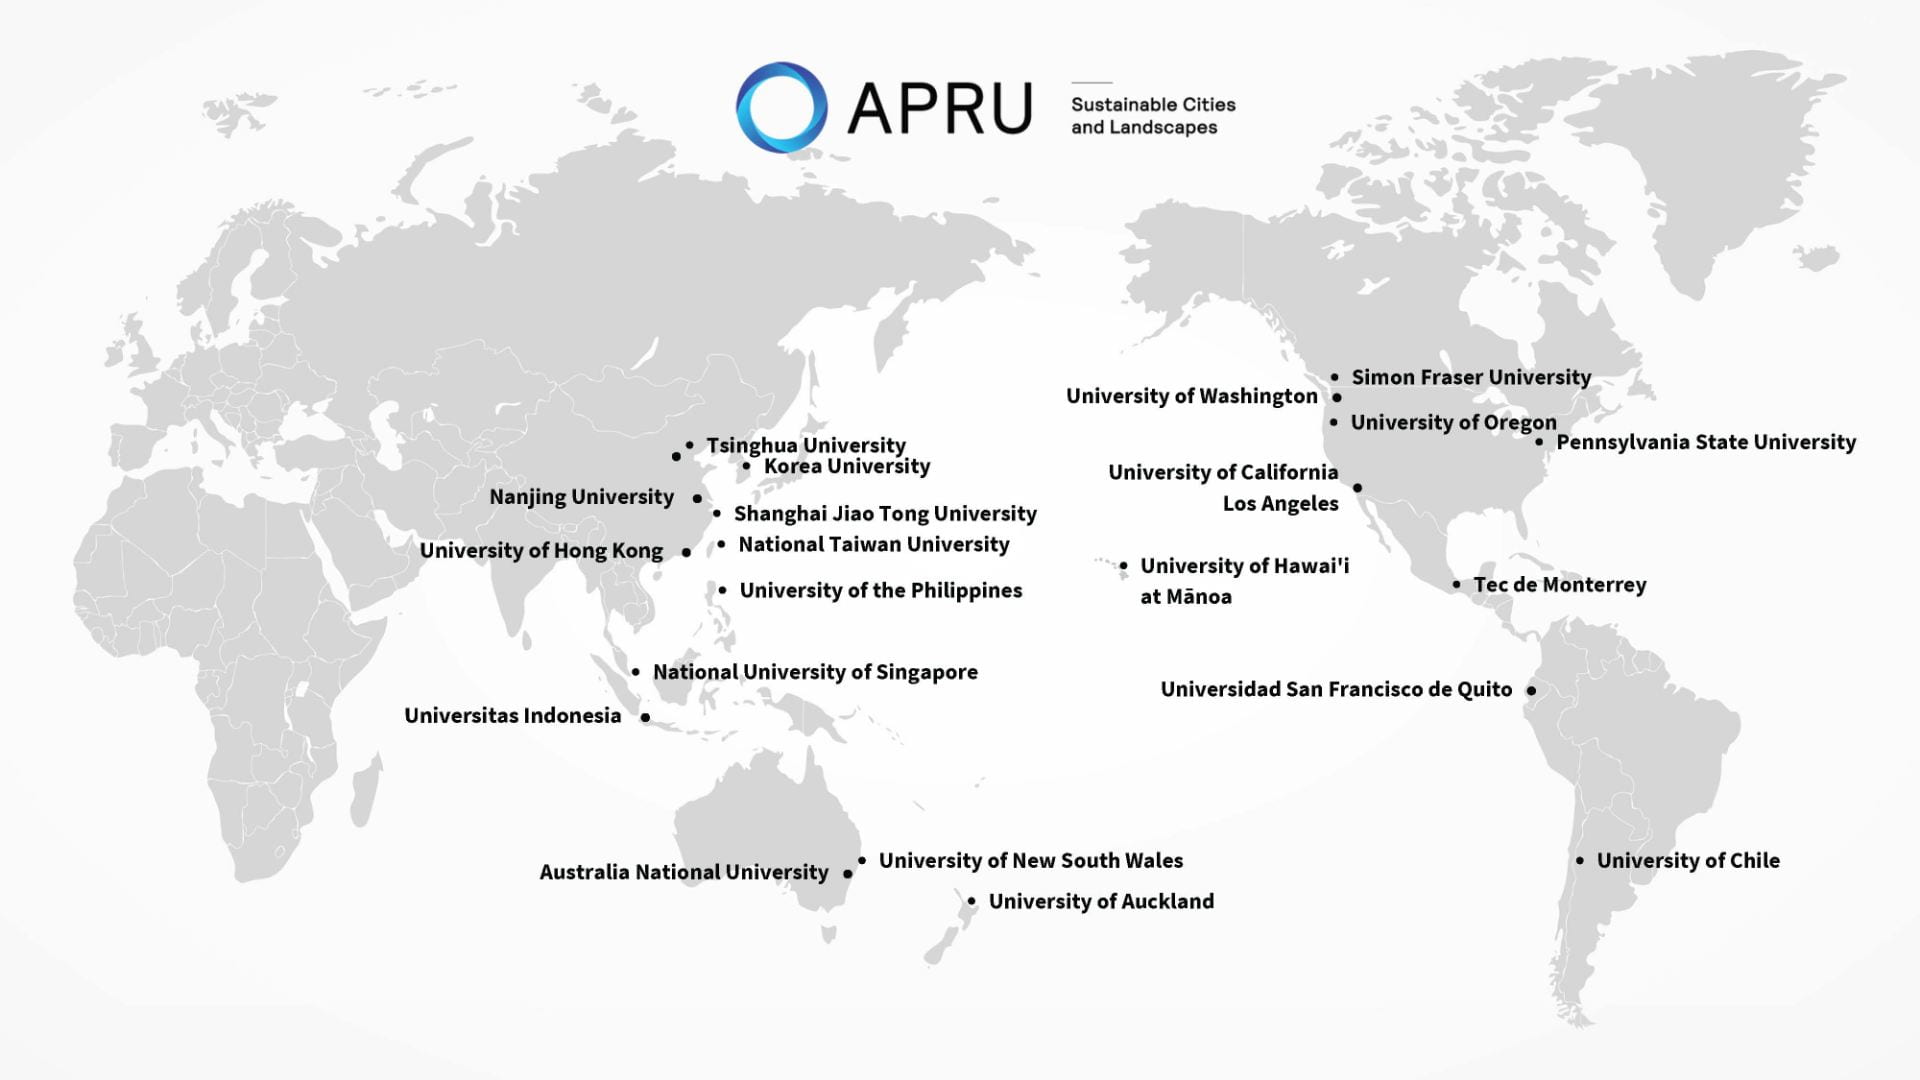 APRU Sustainable Cities and Landscape member schools